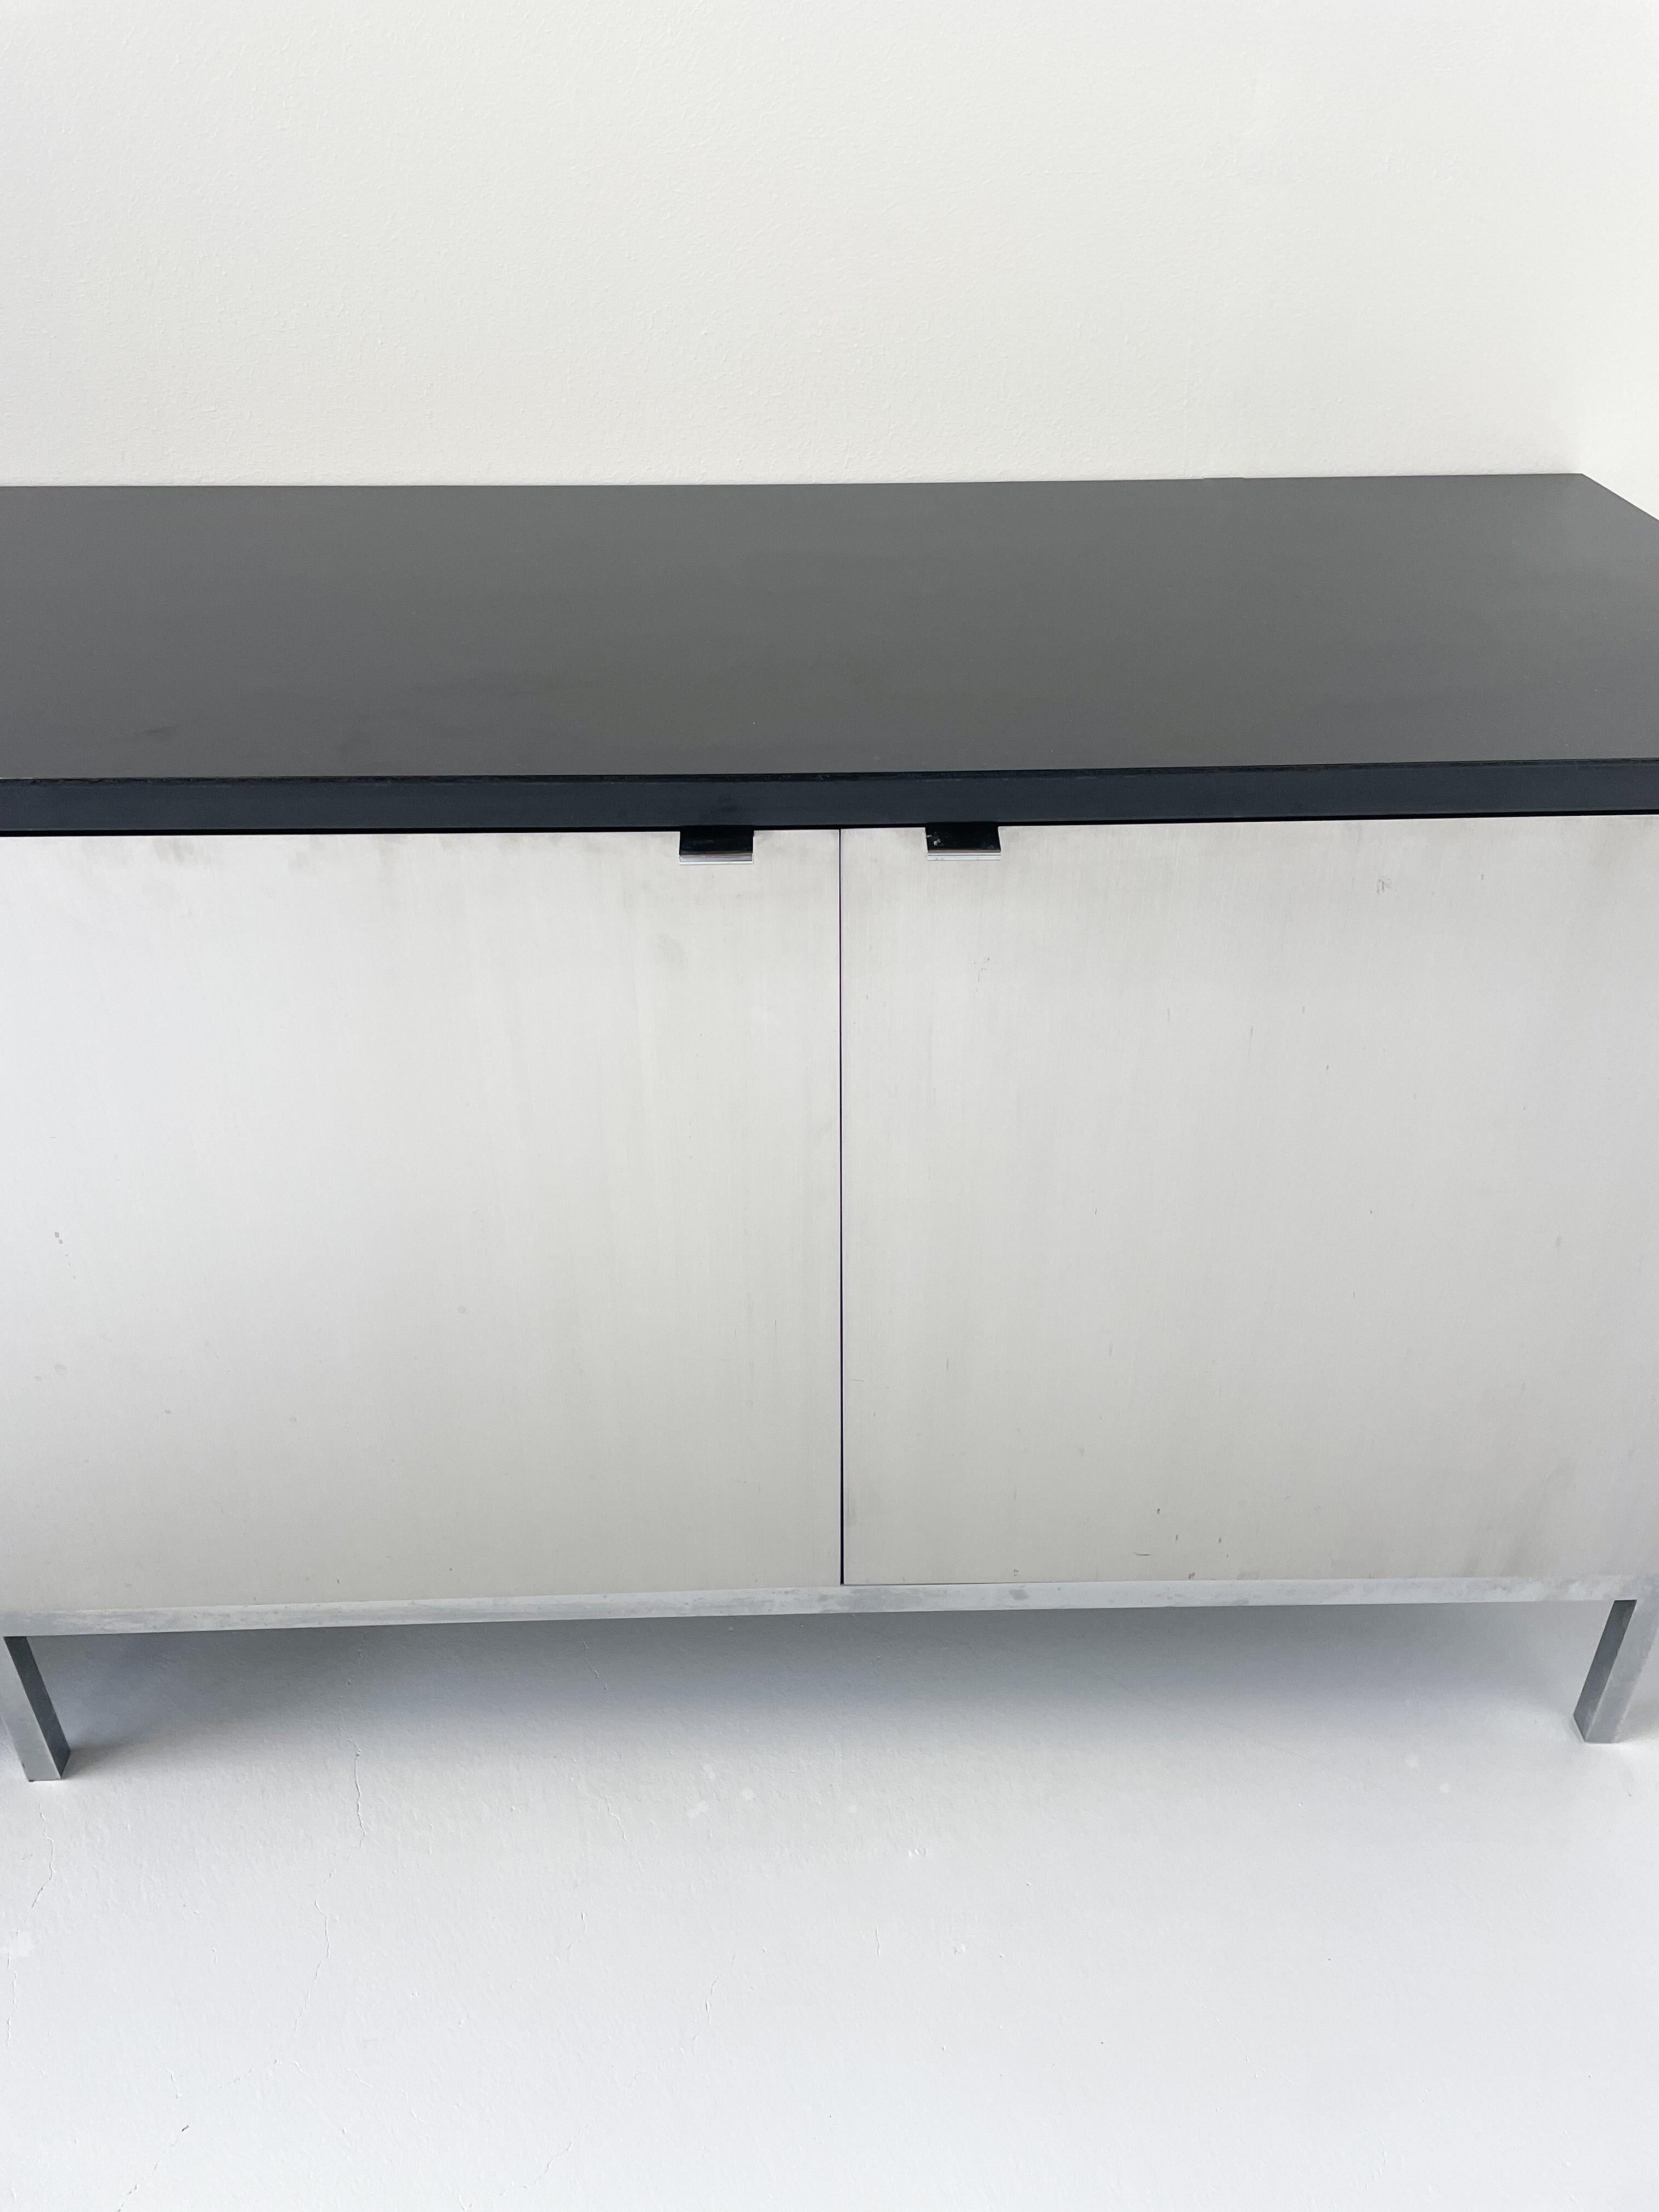 Mid-Century Modern Florence Knoll Sideboard, Aluminium and Wood, 1960s For Sale 2